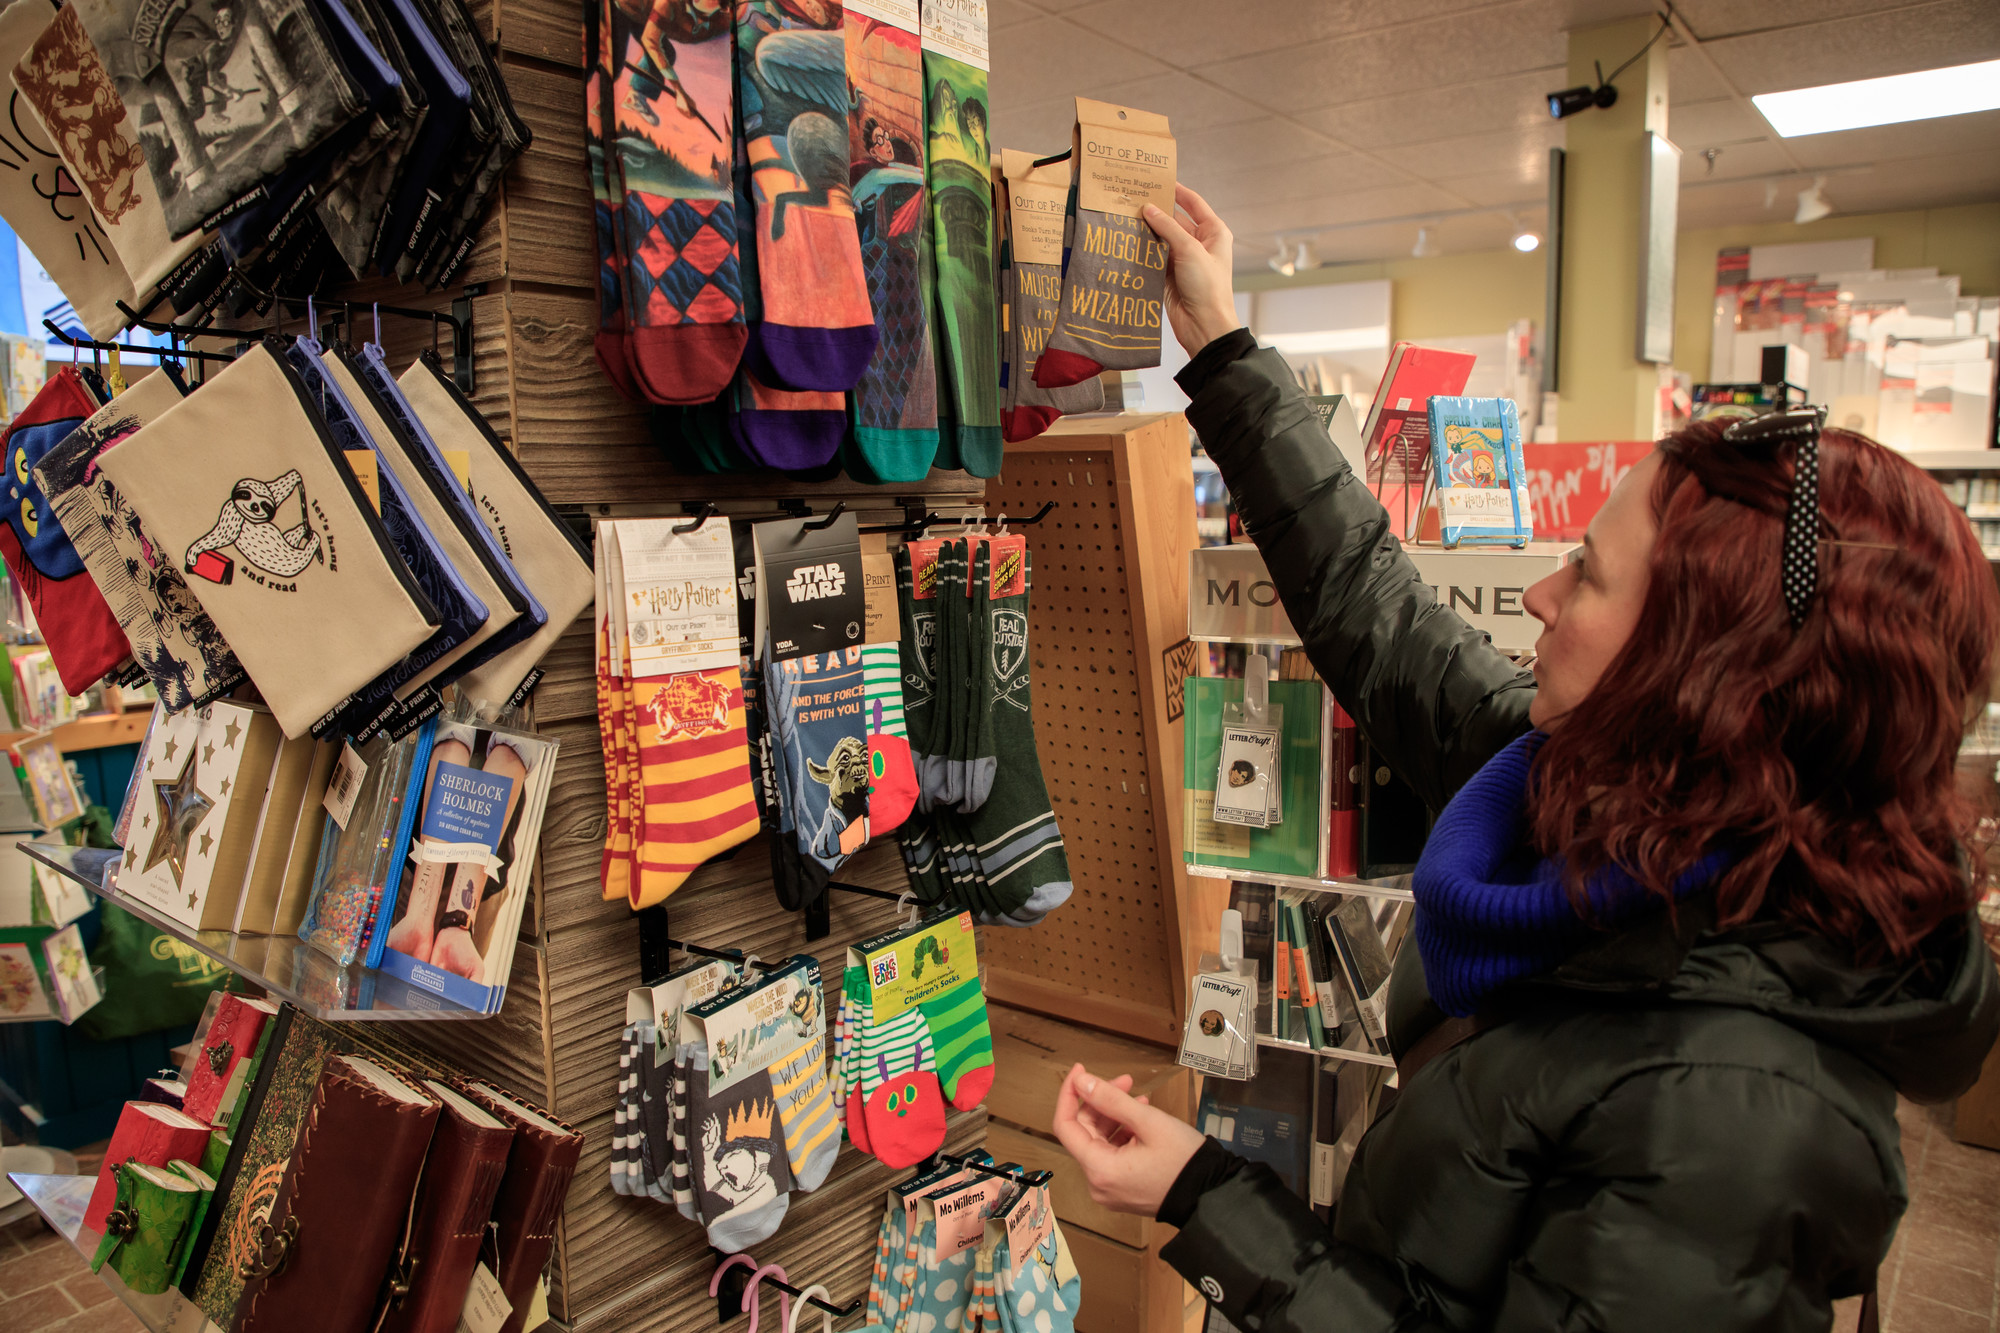 A woman shops for colorful socks in a shop.